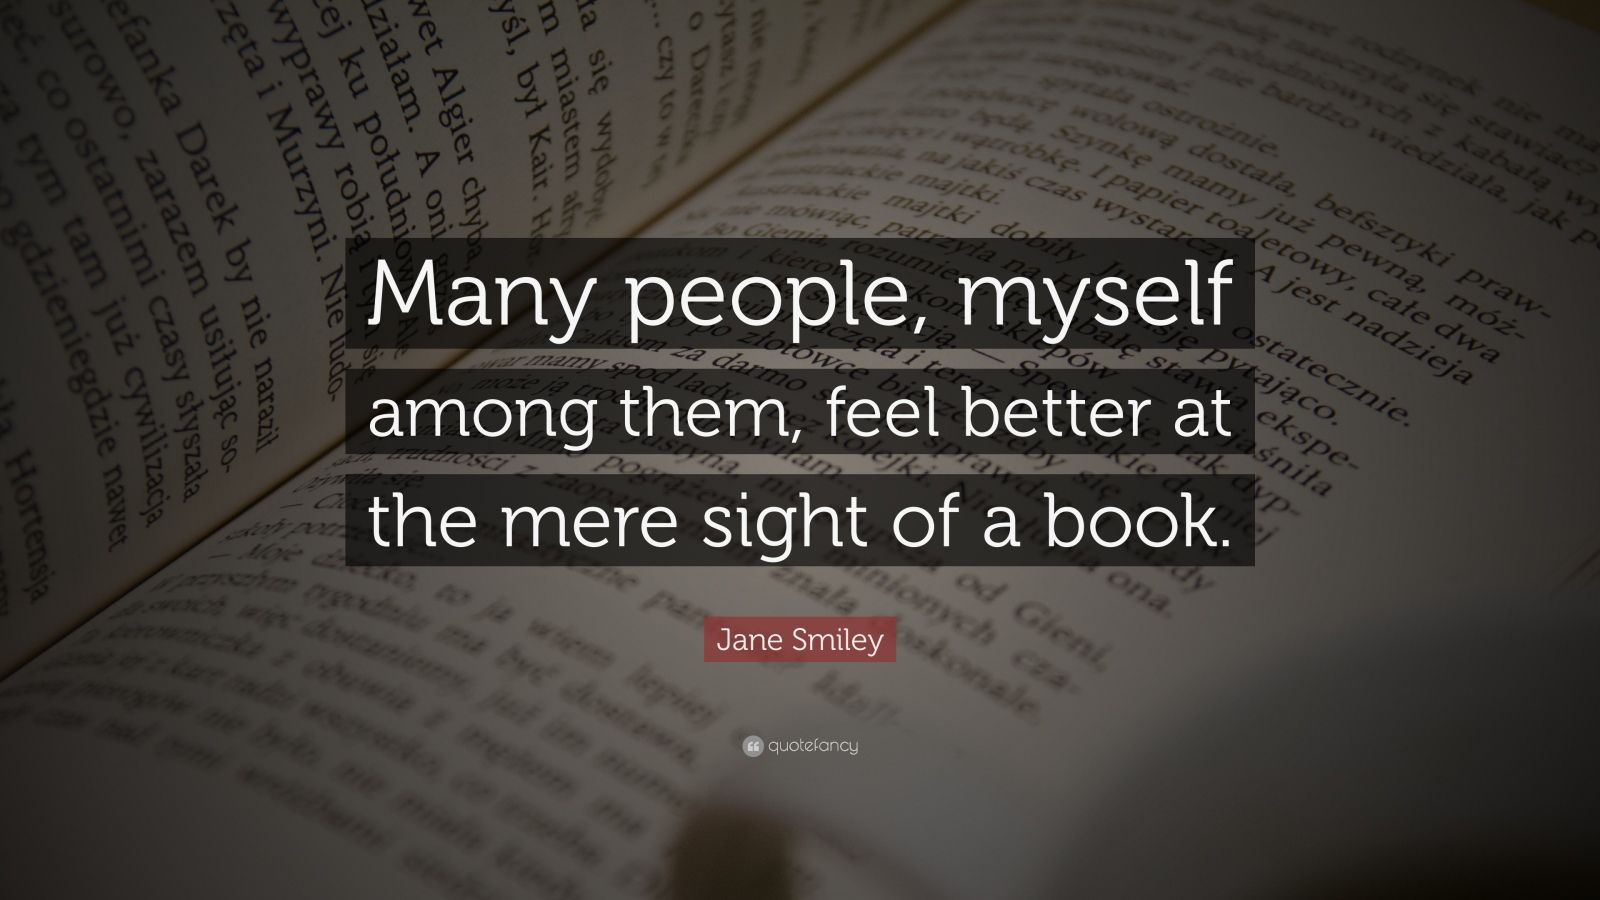 Top 20 Quotes About Books And Reading | 2021 Edition | Free Images